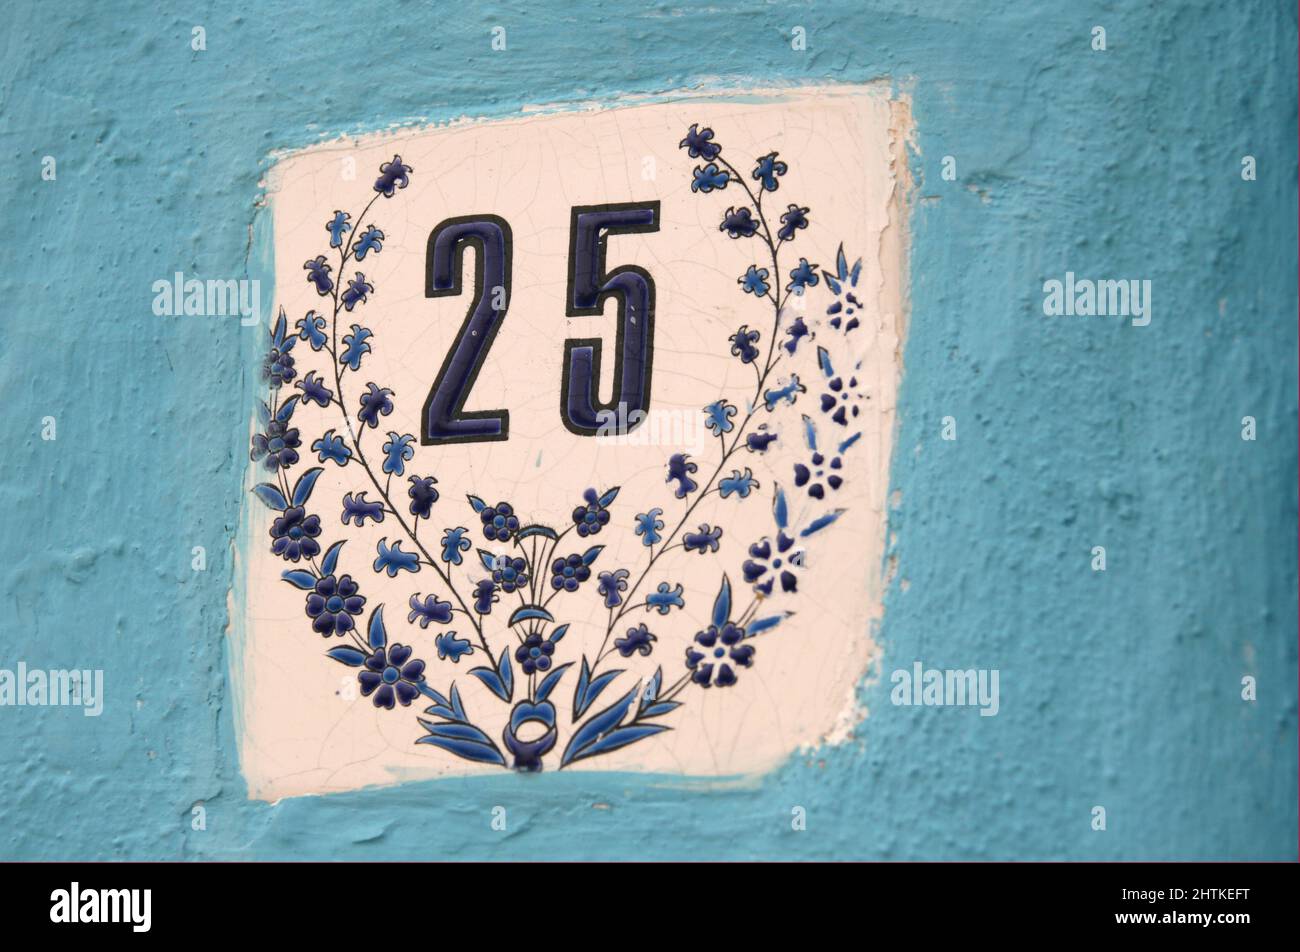 Street number 25 in a tile with ornaments in a blue paint wall Stock Photo